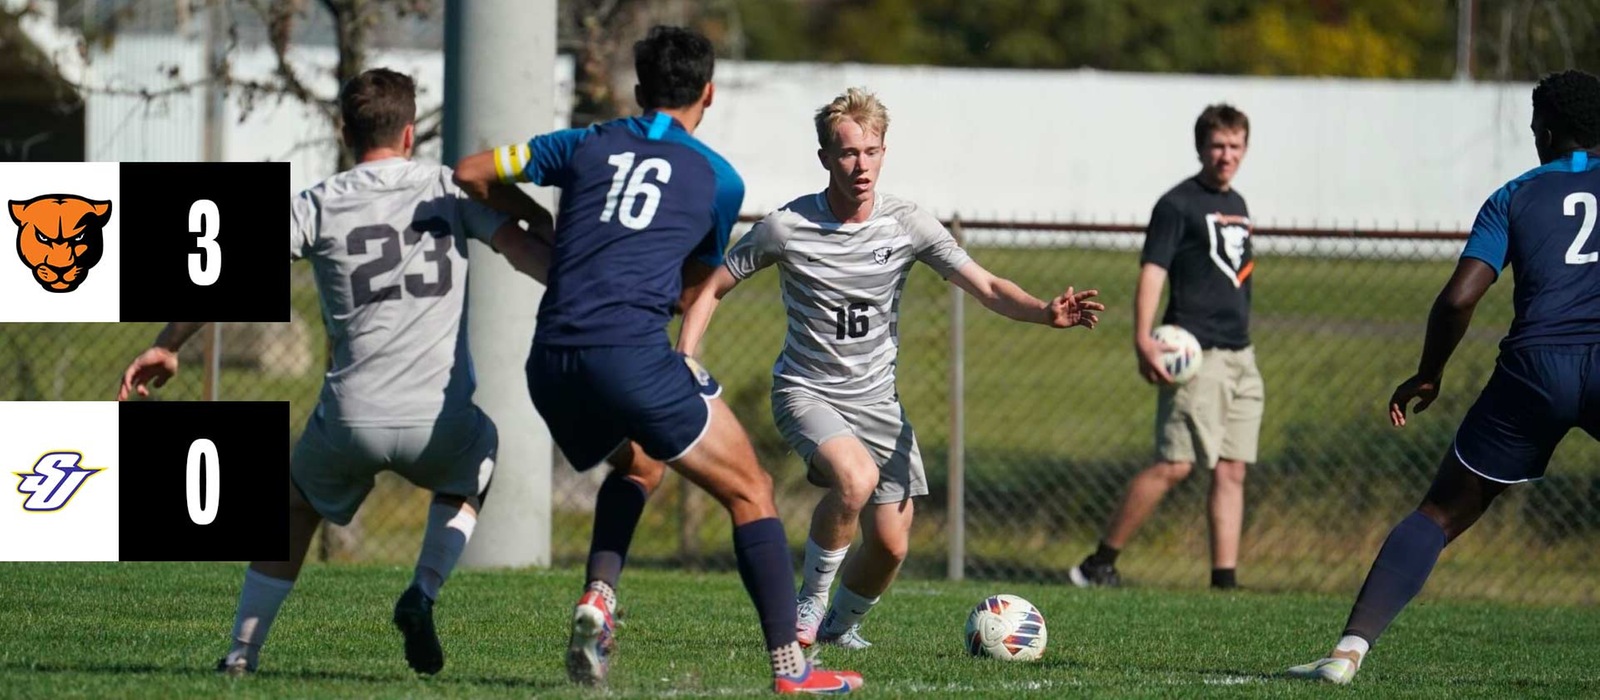 Men's soccer advances to SLIAC championship match with 3-0 win at Spalding